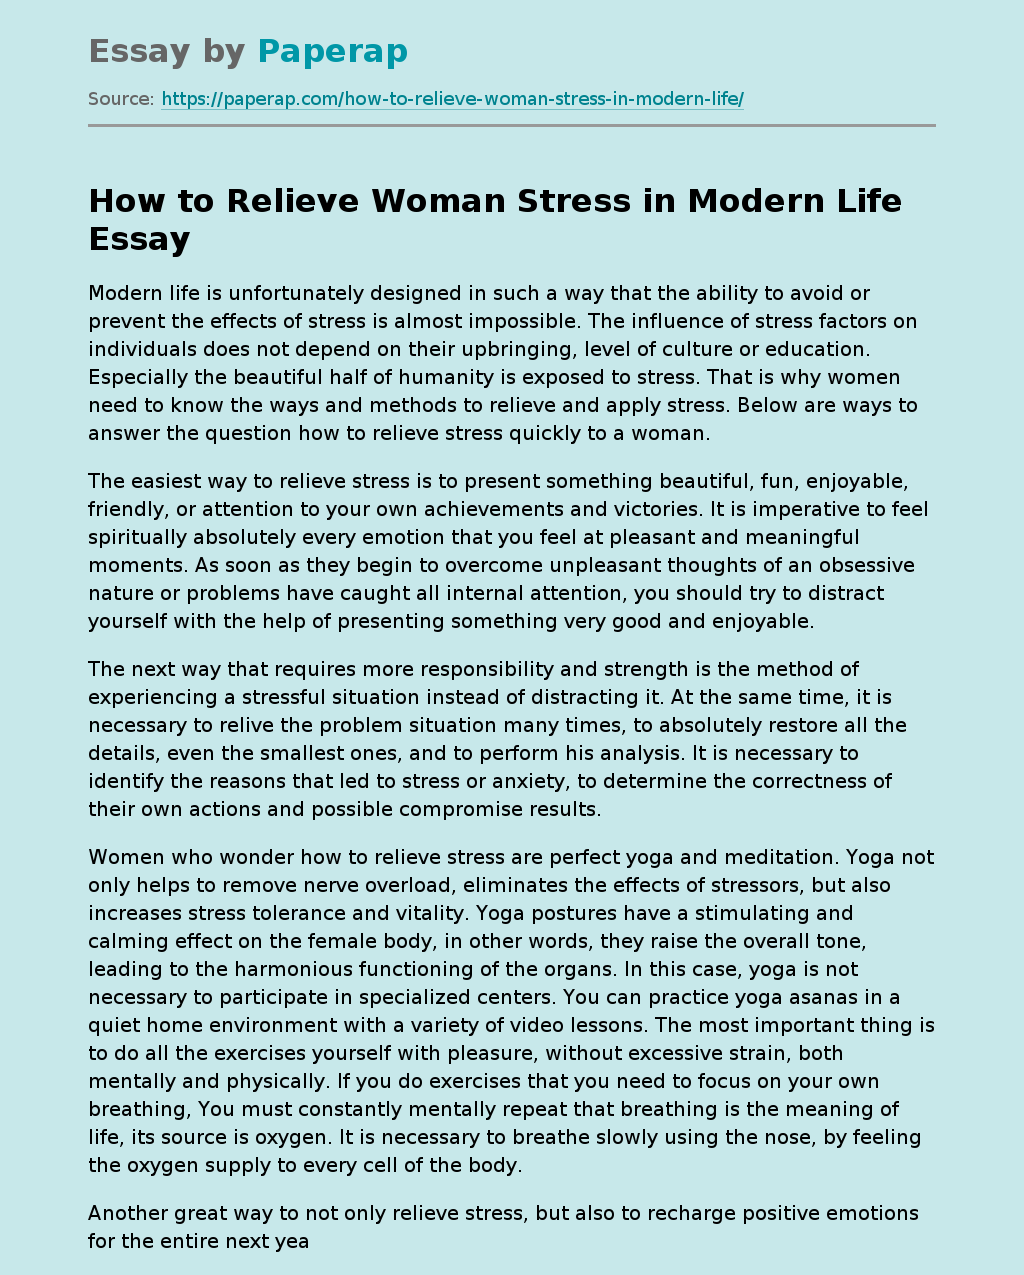 How to Relieve Woman Stress in Modern Life